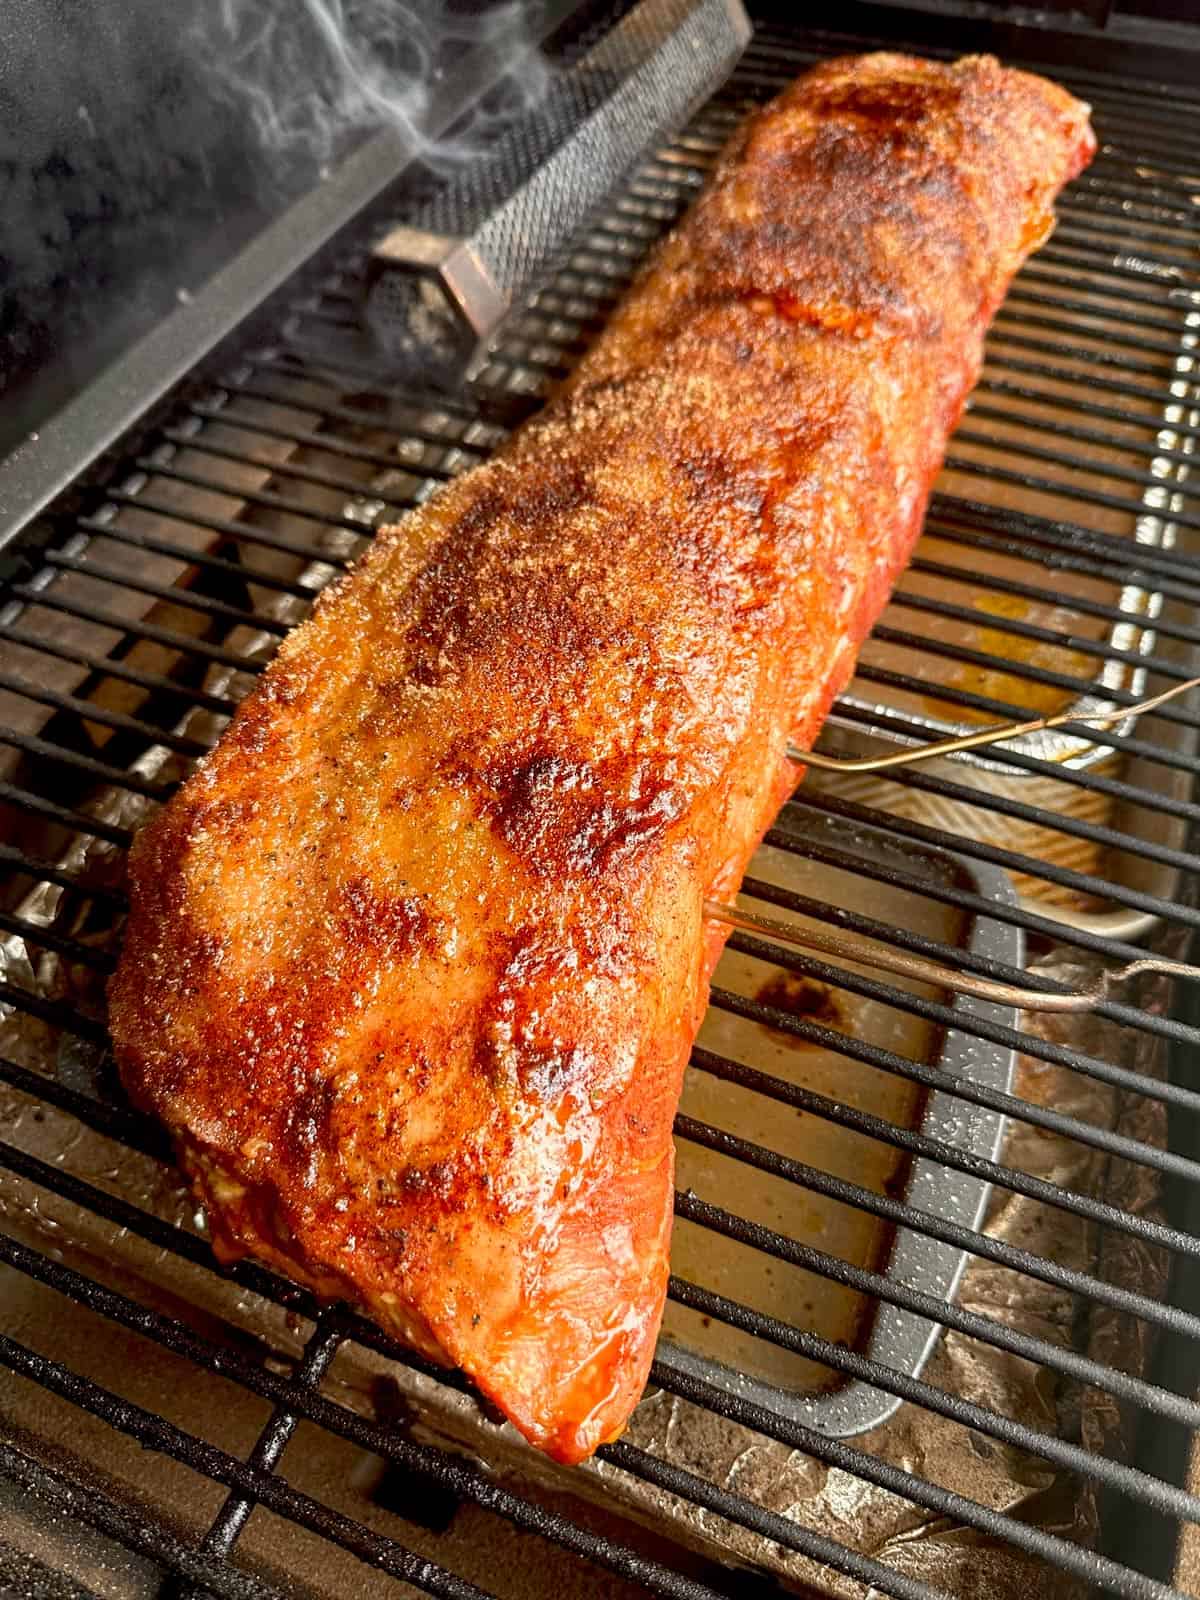 A long piece of golden-brown meat on the grill.